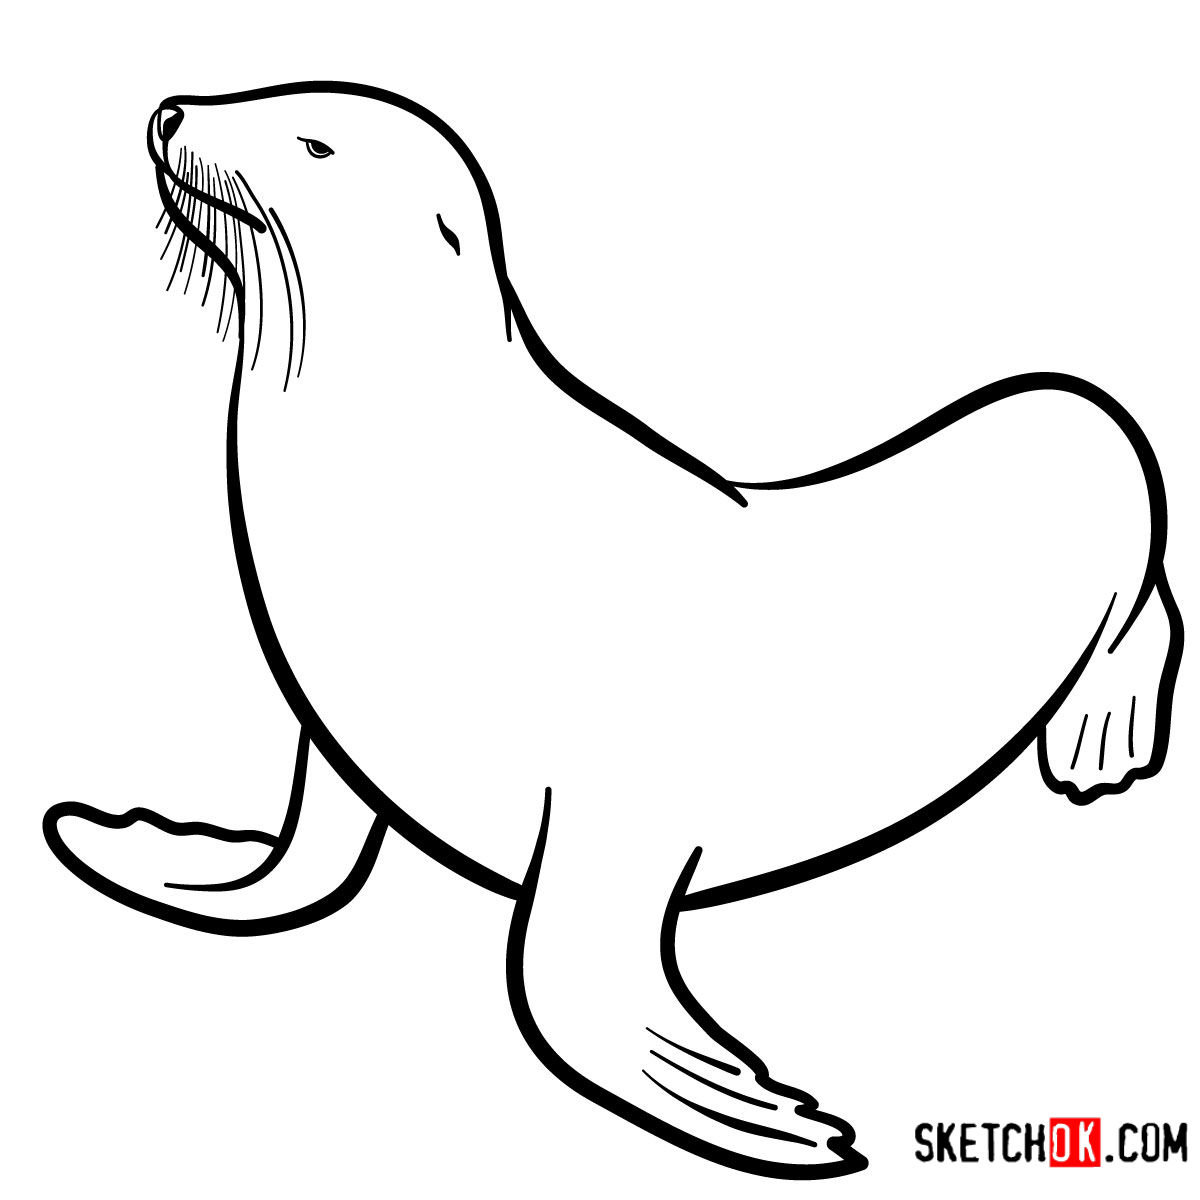 How to Draw a Sea Lion step by step – Easy Animals 2 Draw